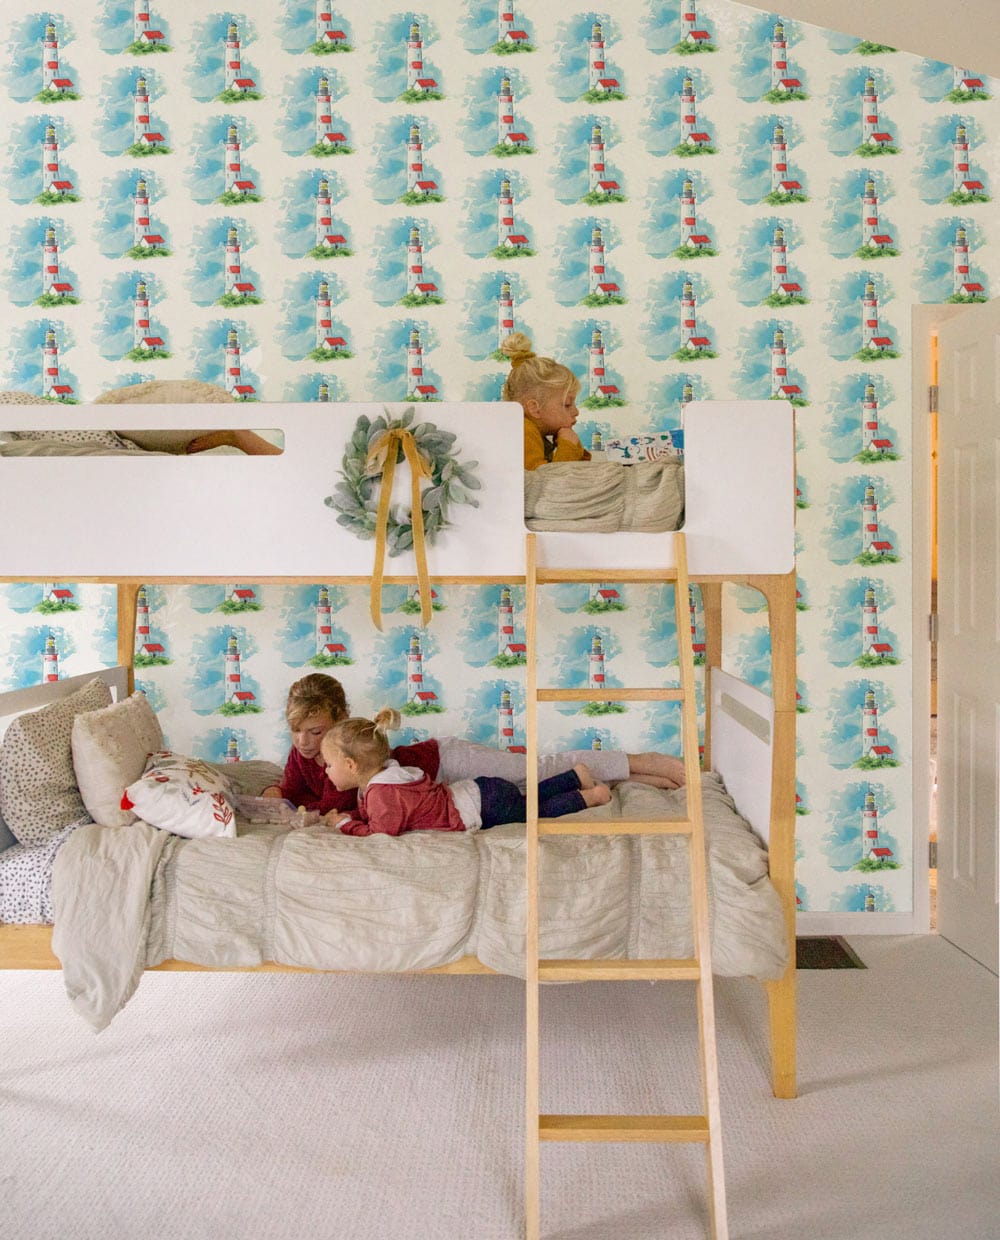 bespoke murals for children's rooms, a repeating beacon pattern